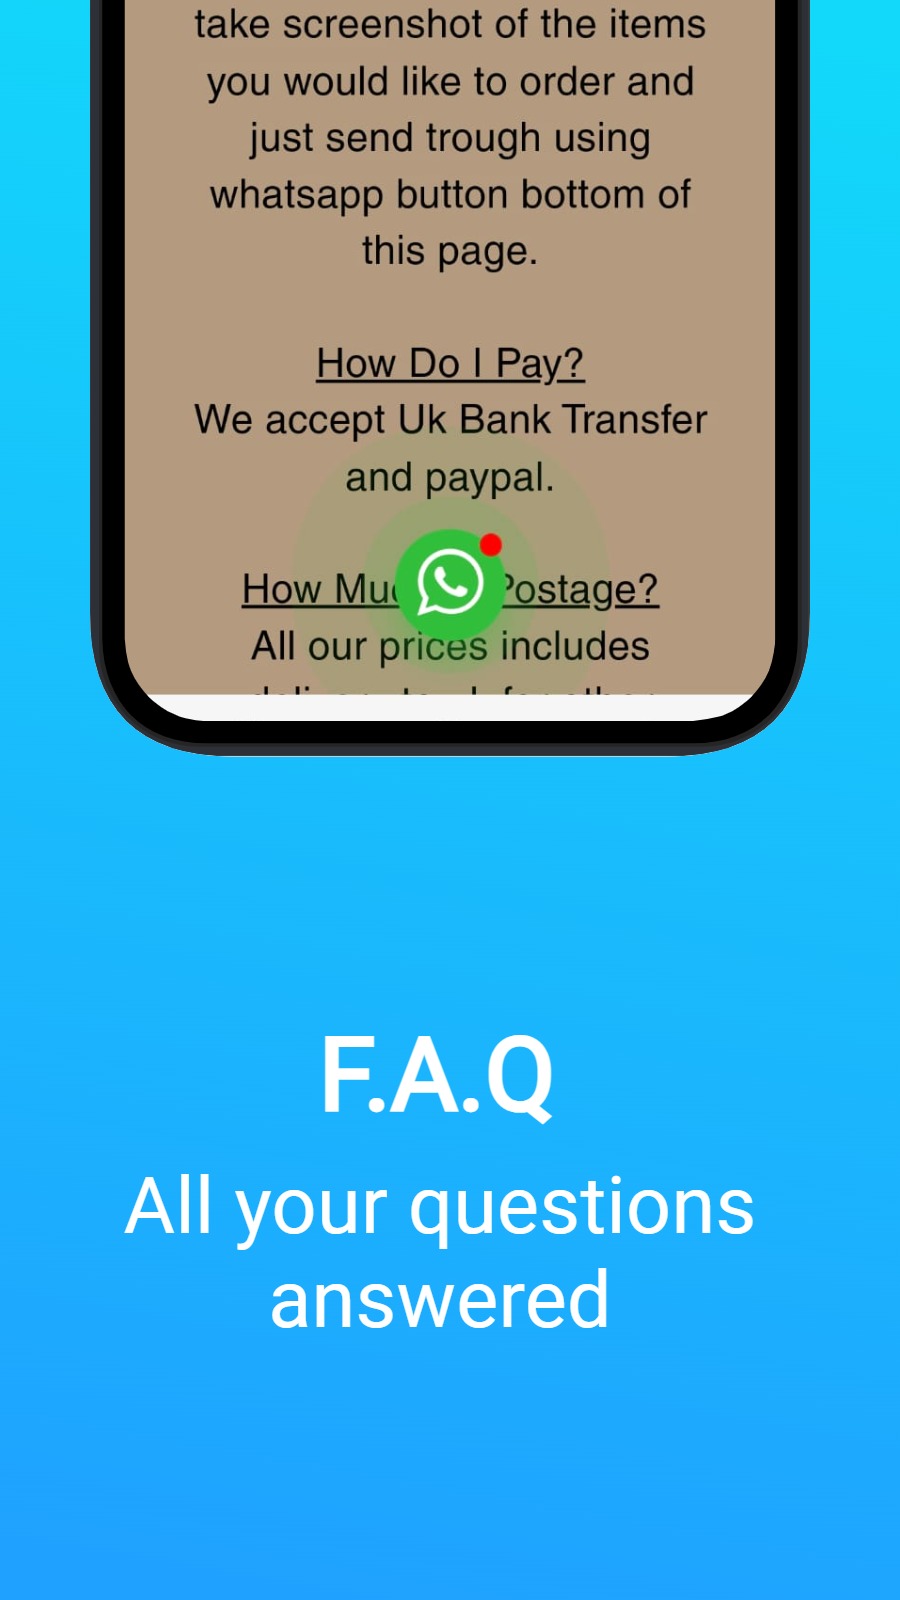 F.A.Q - All your questions answered